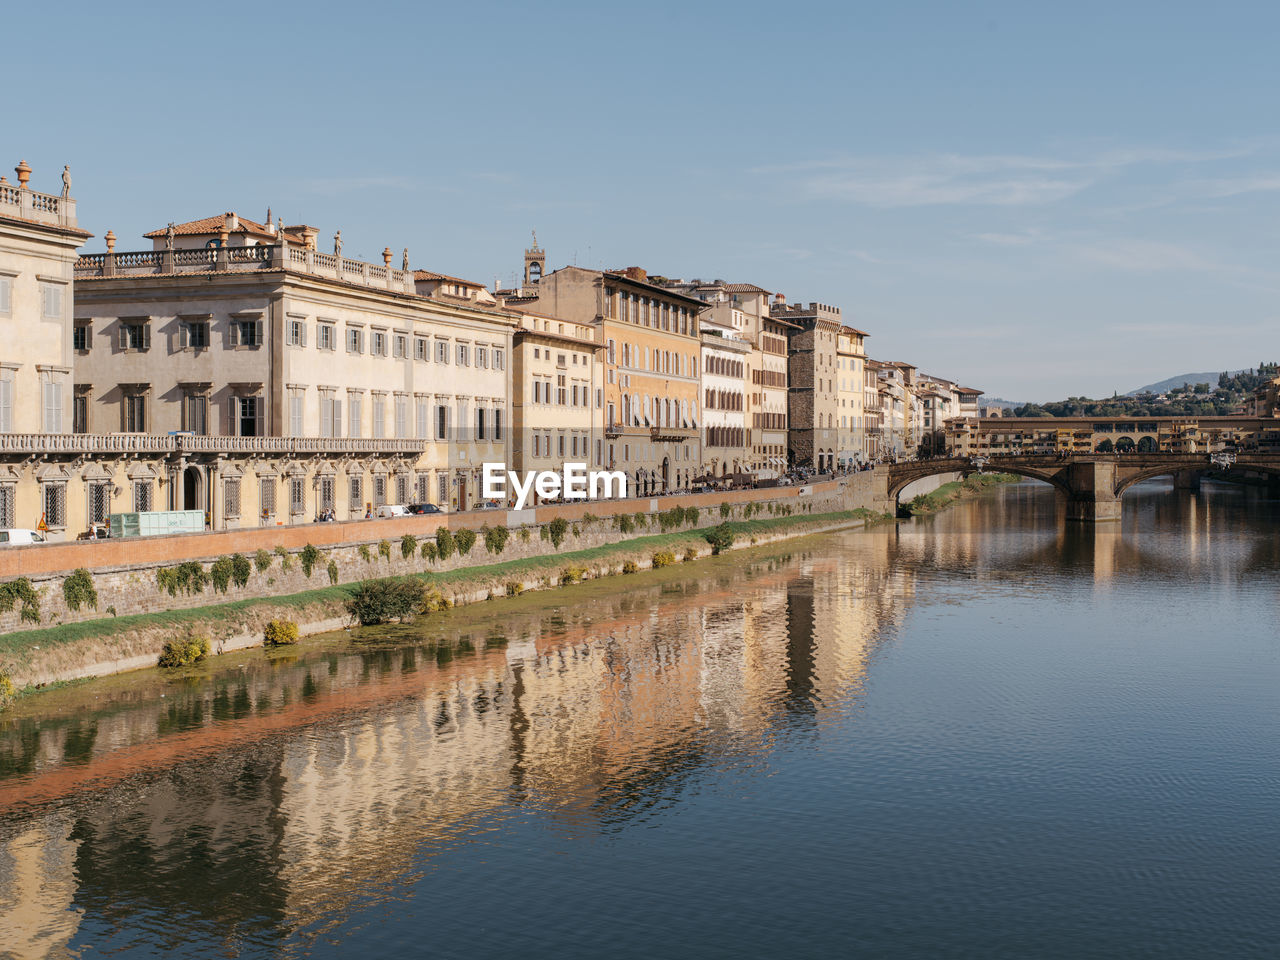 Florence in fall with reflection of buildings in the arno river